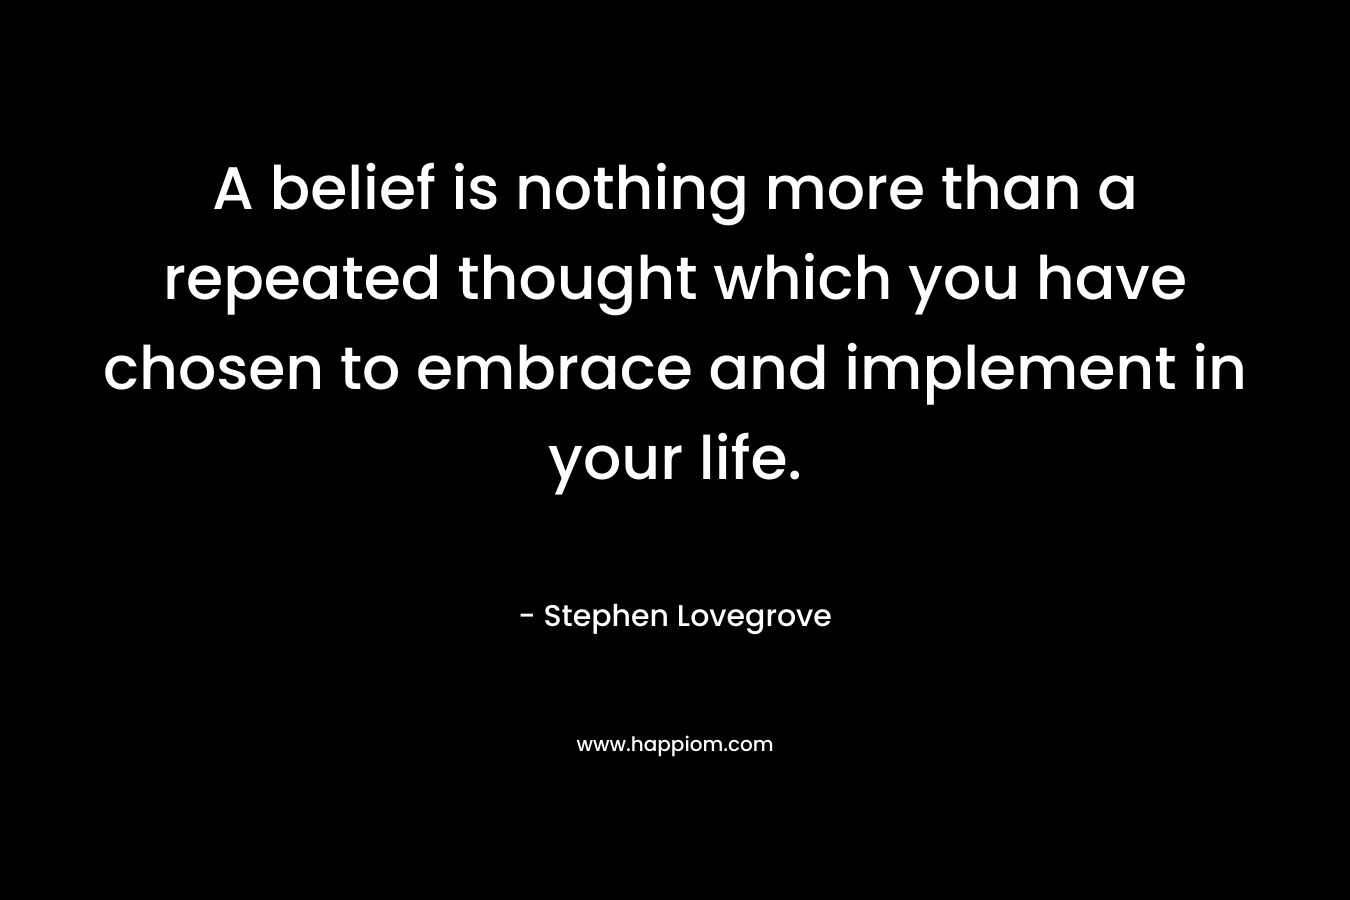 A belief is nothing more than a repeated thought which you have chosen to embrace and implement in your life. – Stephen Lovegrove